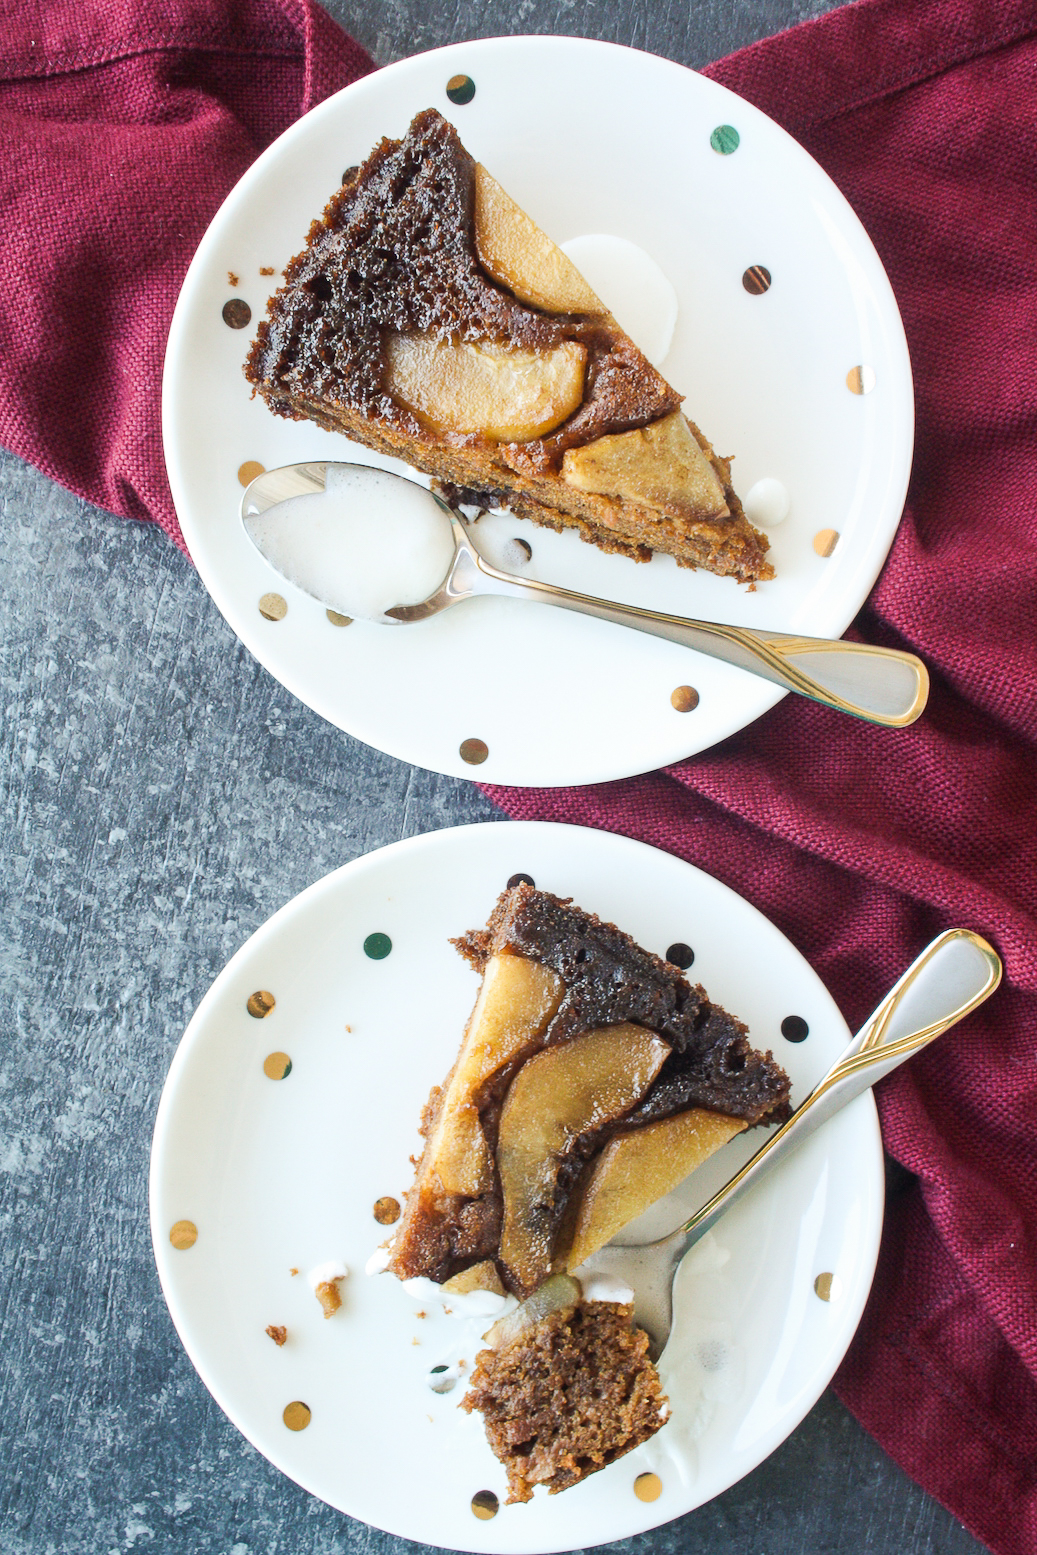 A moist pear upside-down cake with orange zest, ginger and molasses!